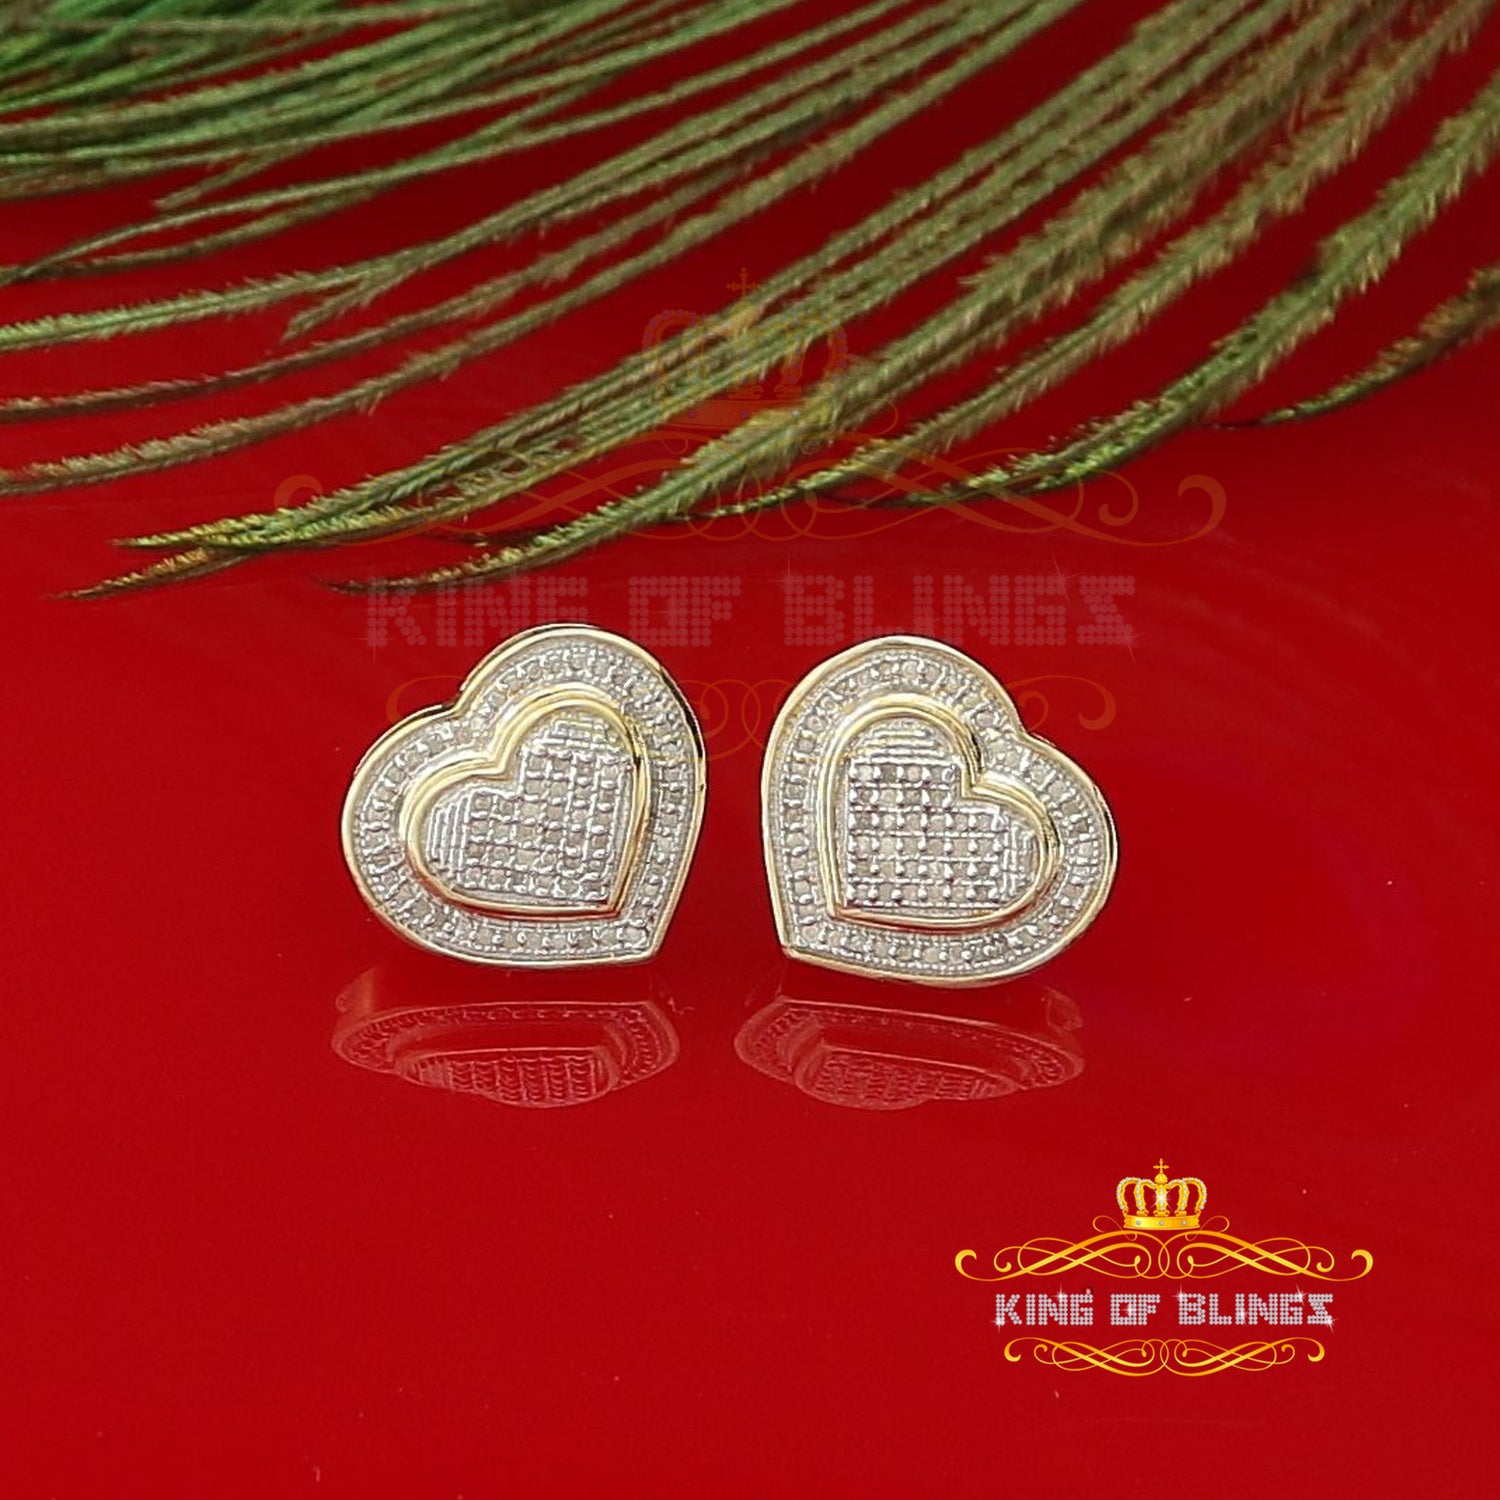 King of Blings-Aretes Para Hombre Heart 925 Yellow Silver 0.33ct Diamond Women's Style Earrings KING OF BLINGS